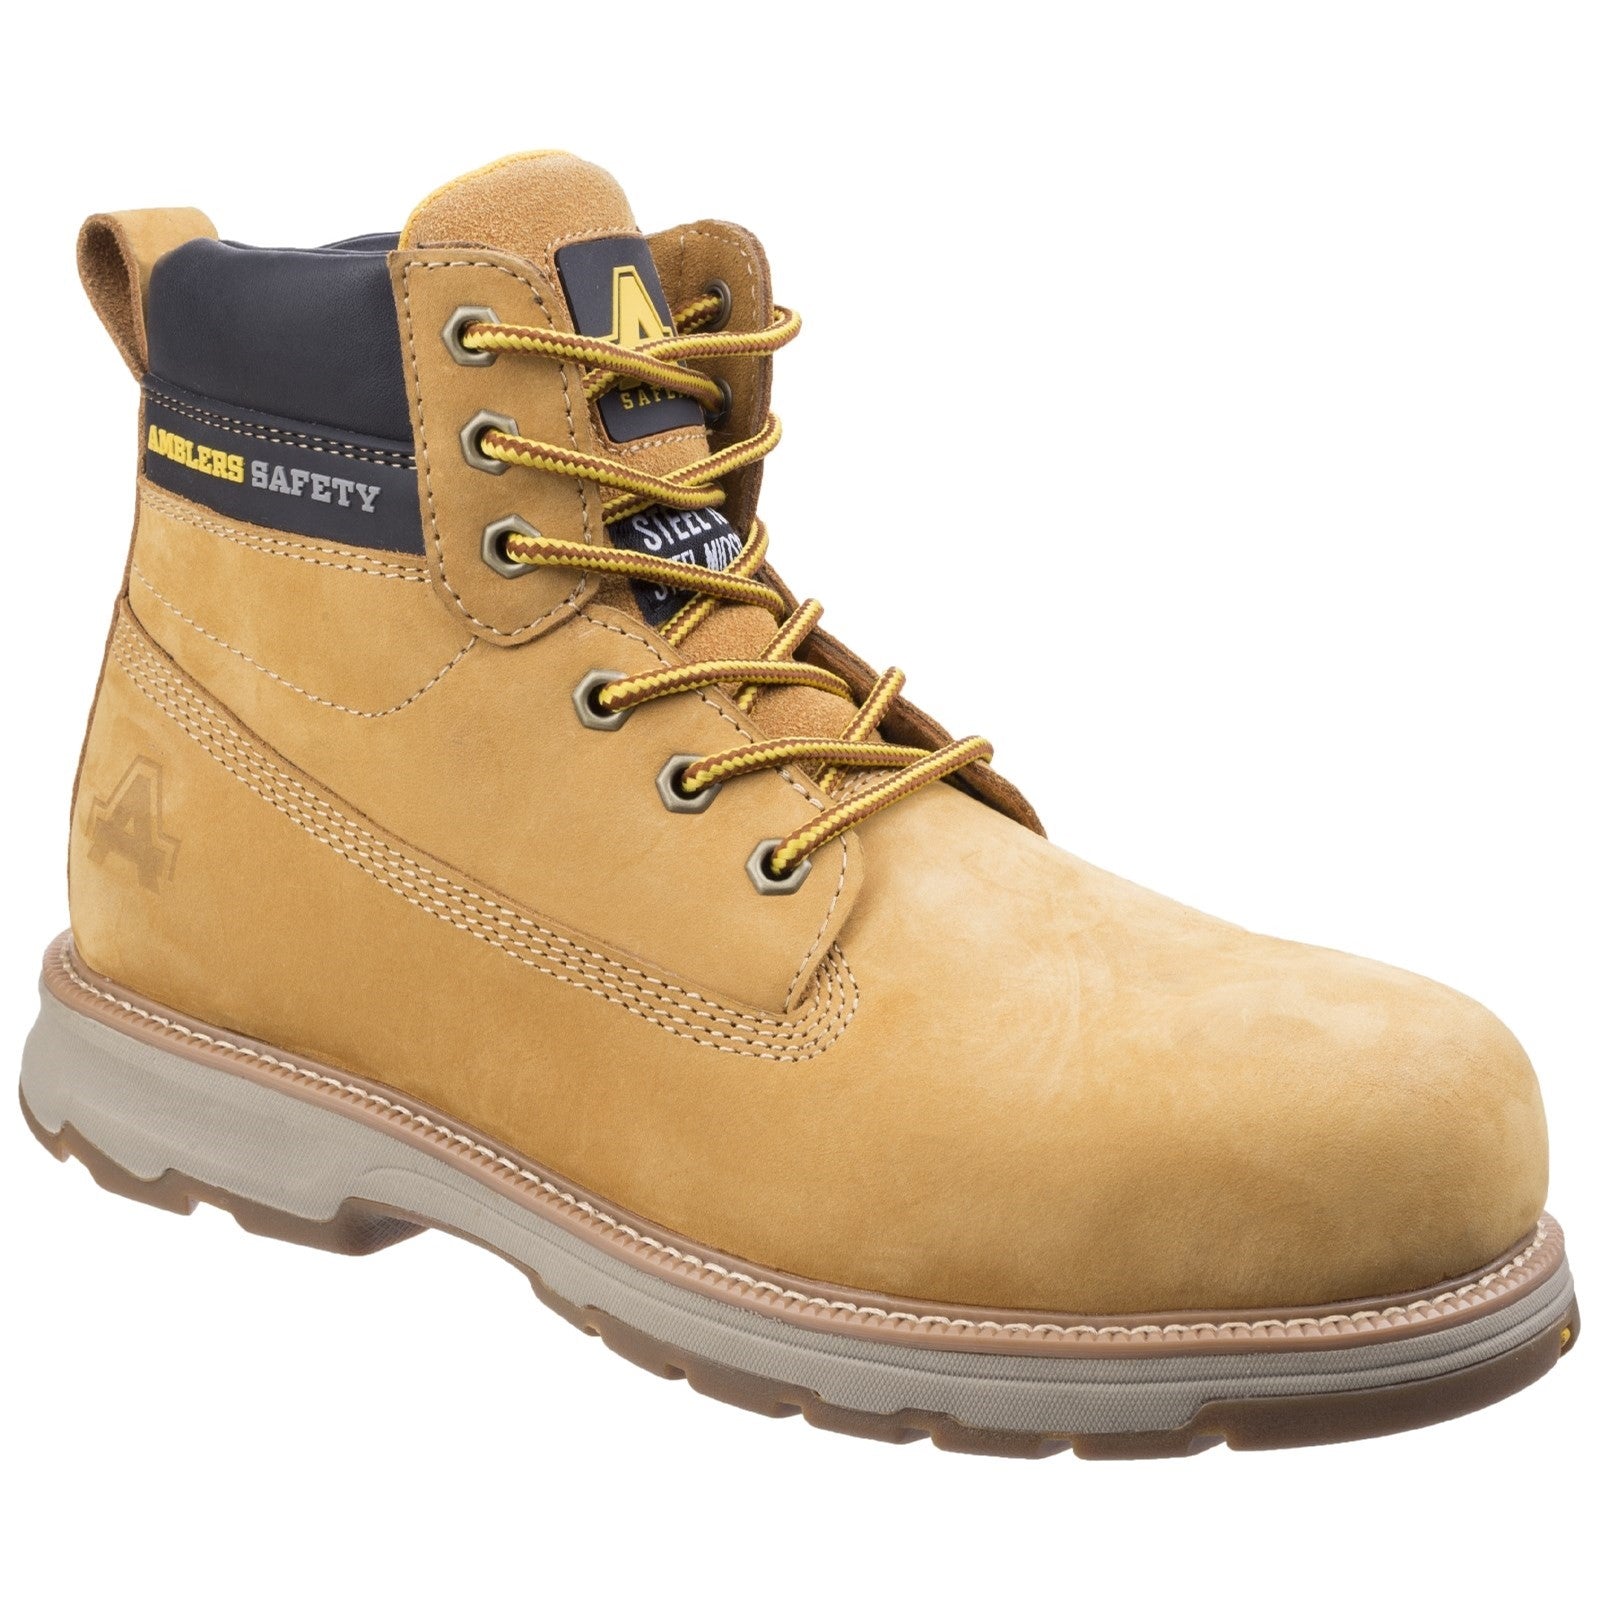 Amblers Safety AS170 Lightweight Full Grain Leather Safety Boot